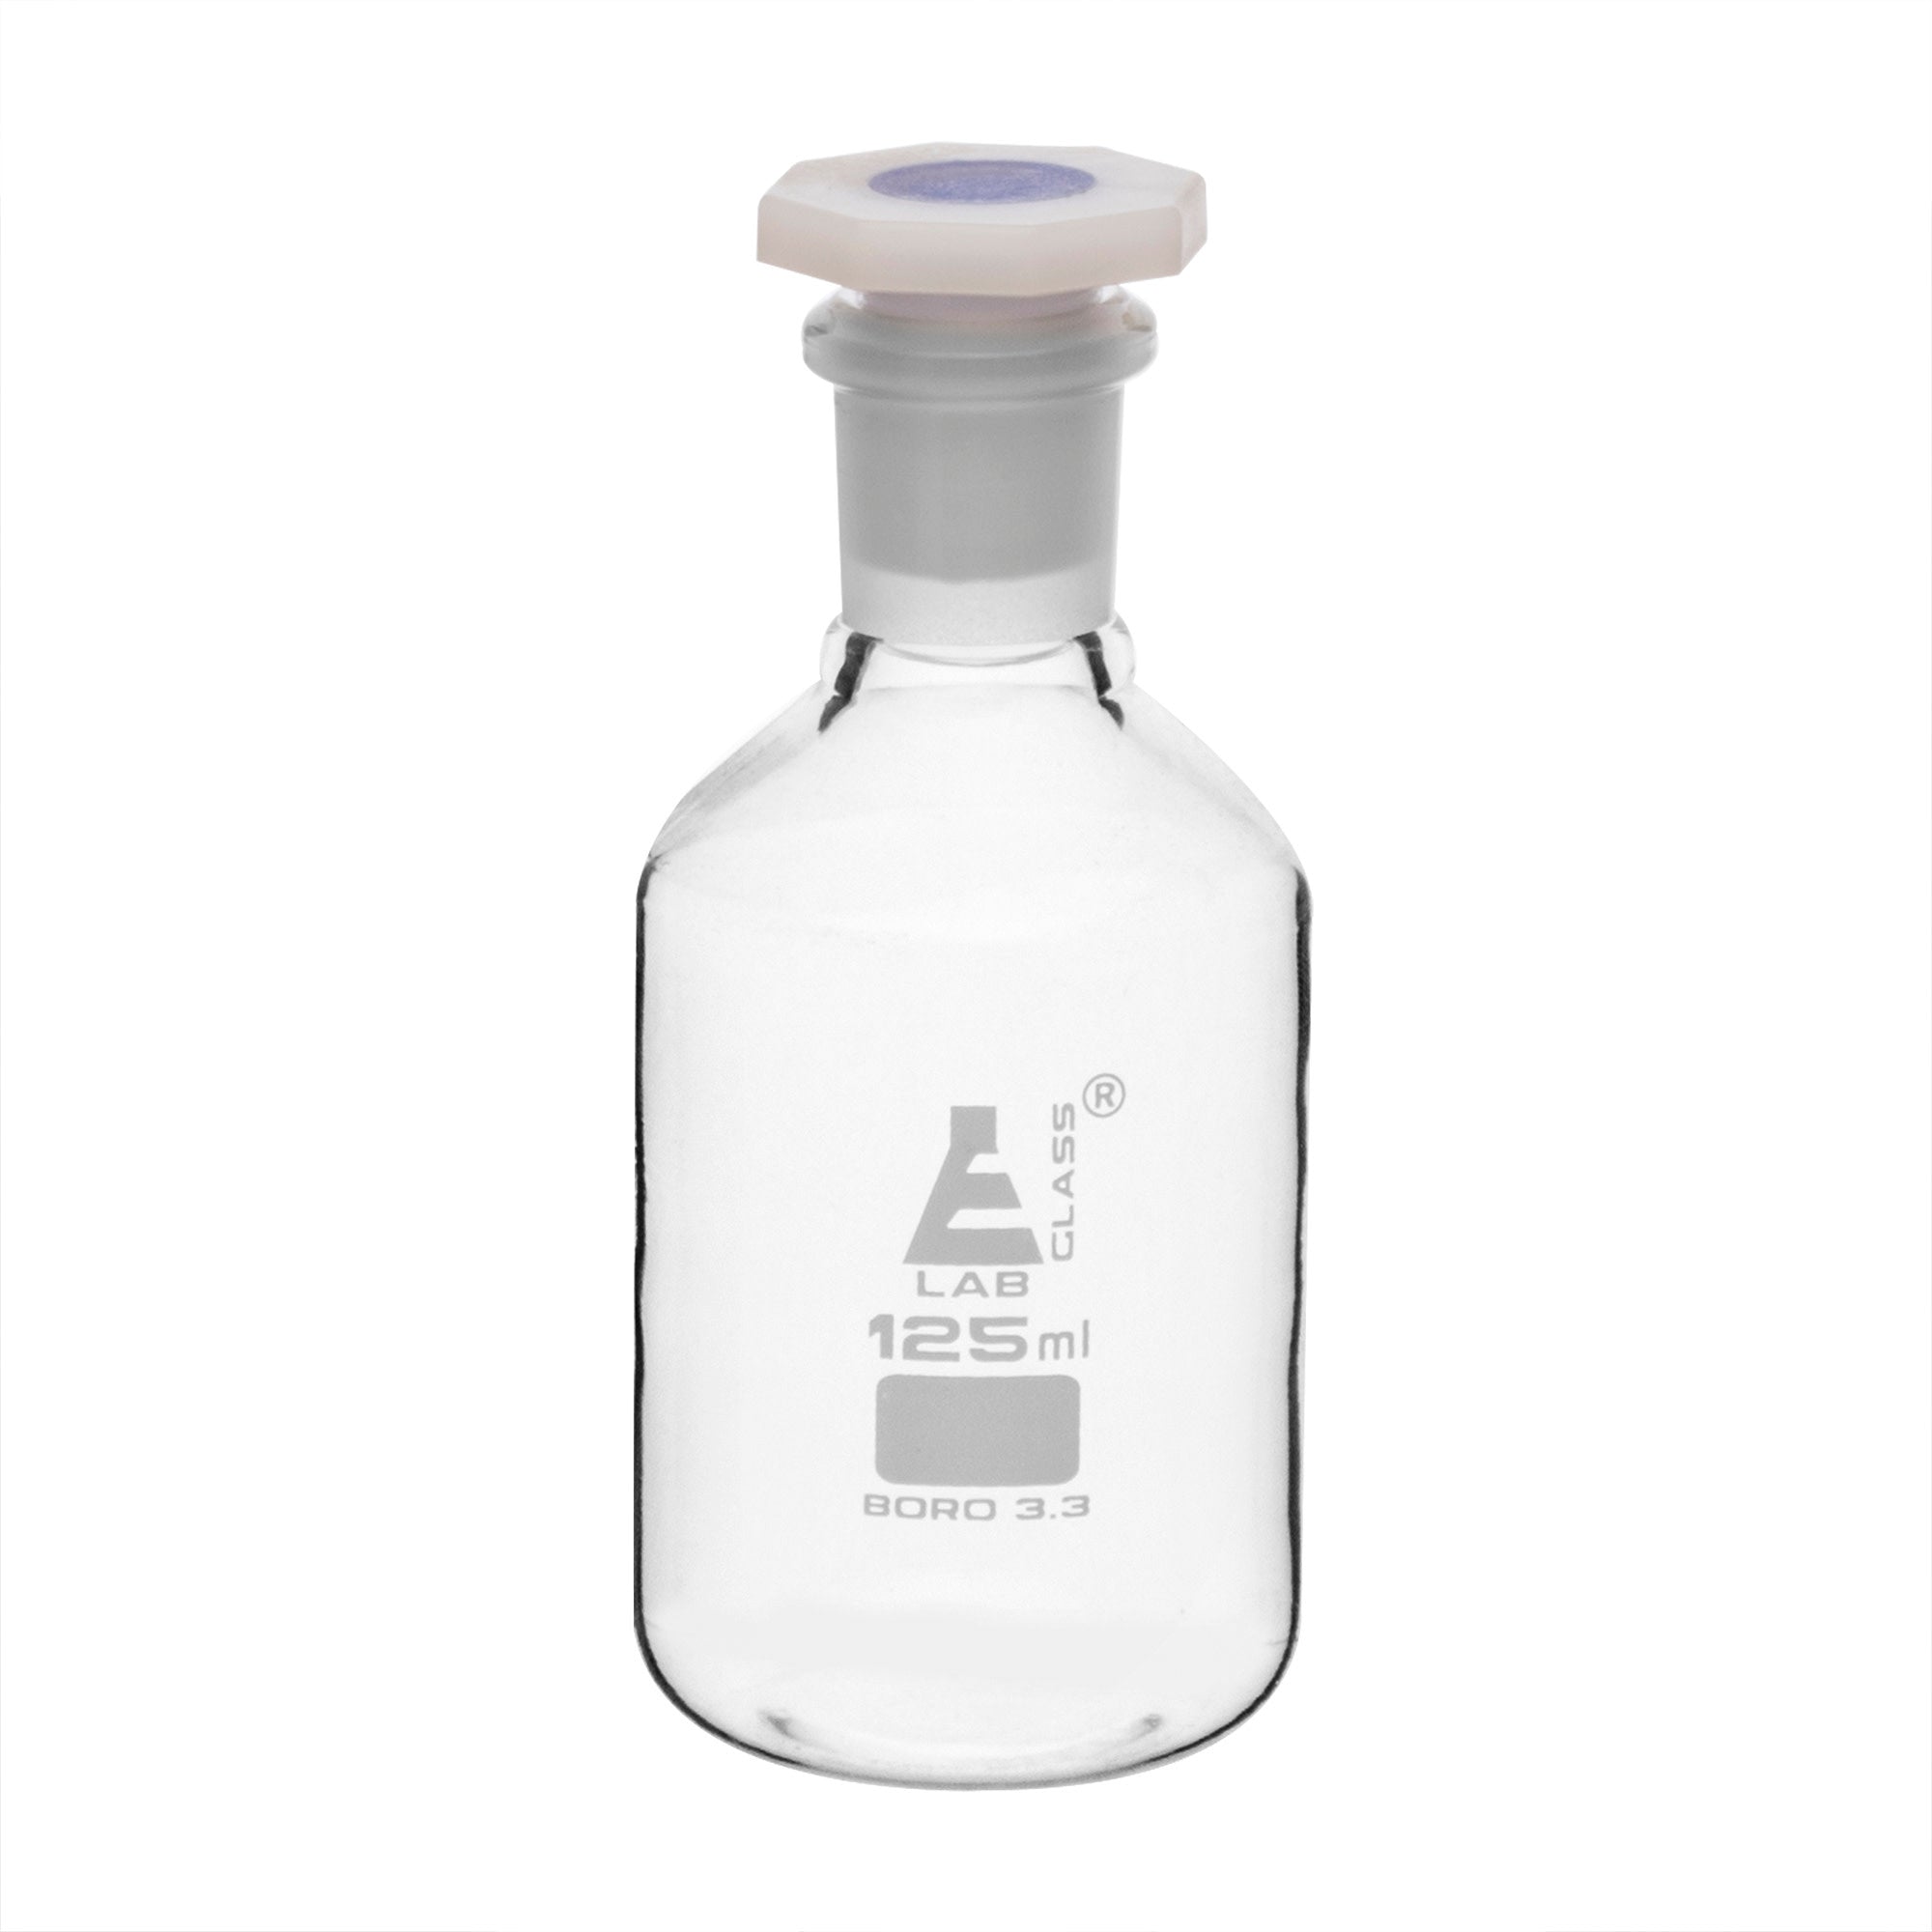 Clear Borosilicate Glass Reagent Bottle with Polyethylene Stopper, 125 ml, Narrow Mouth, Autoclavable